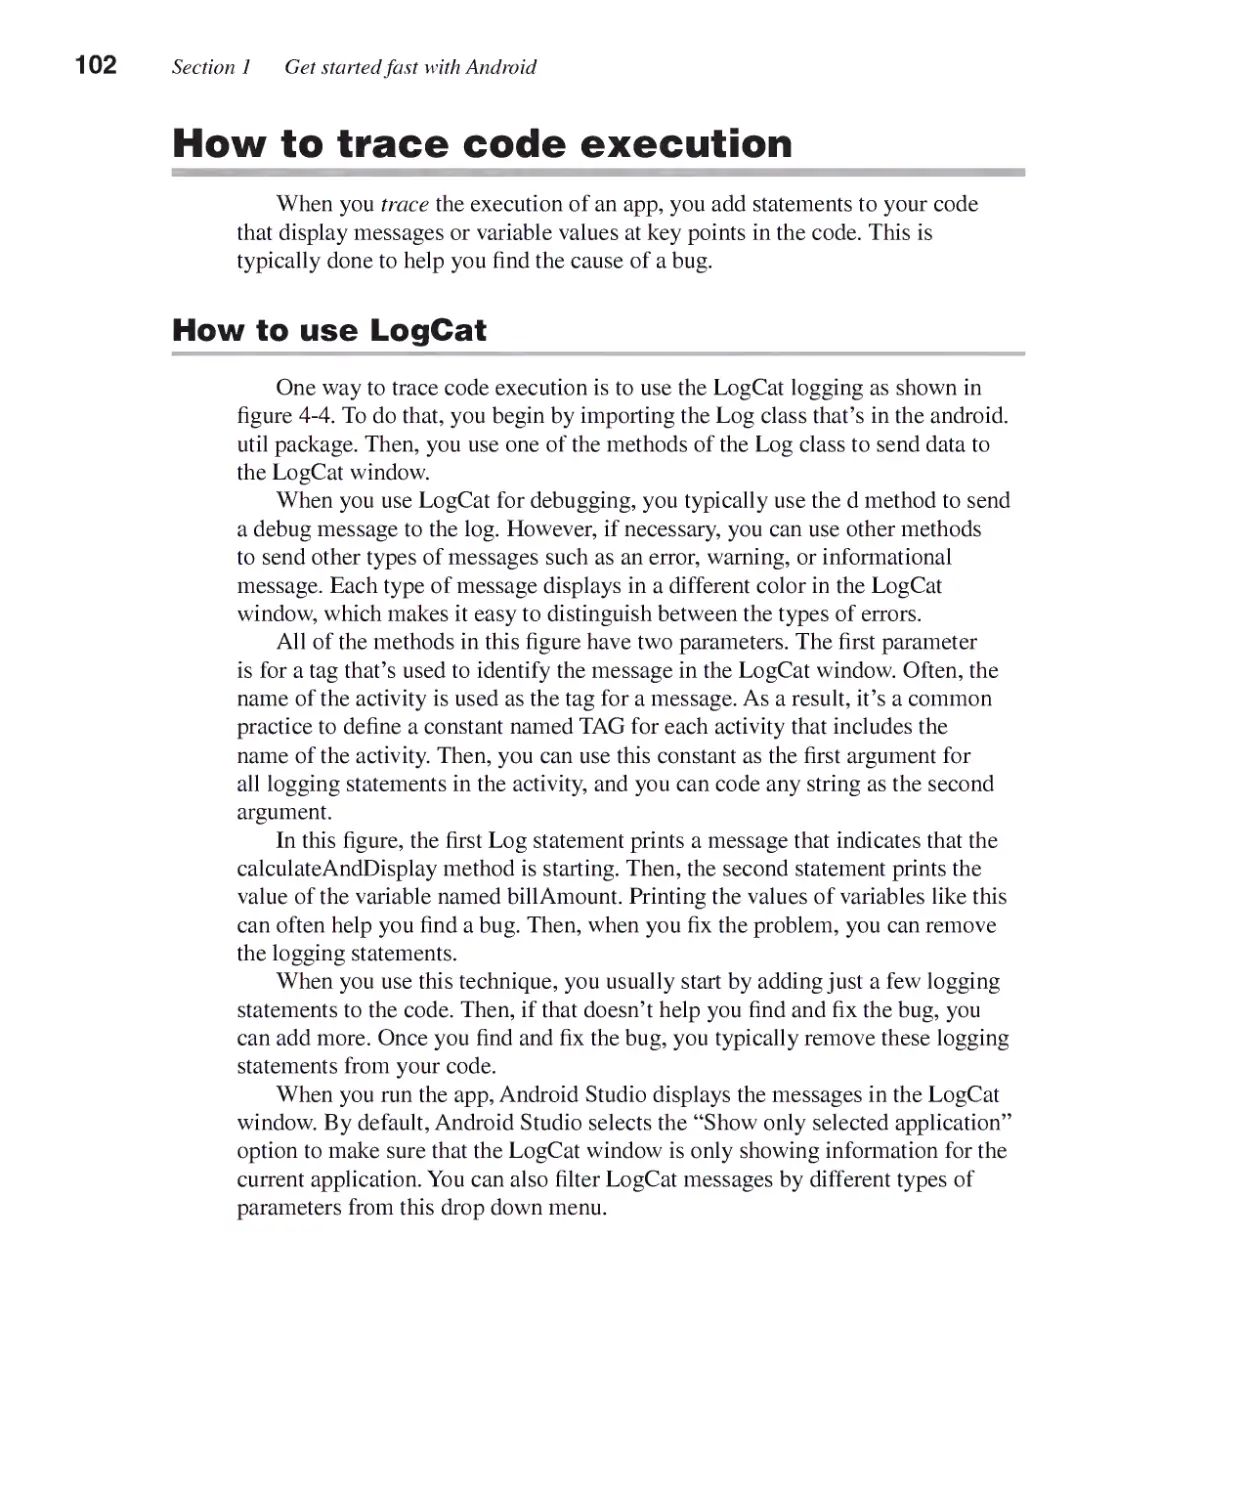 How to Trace Code Execution